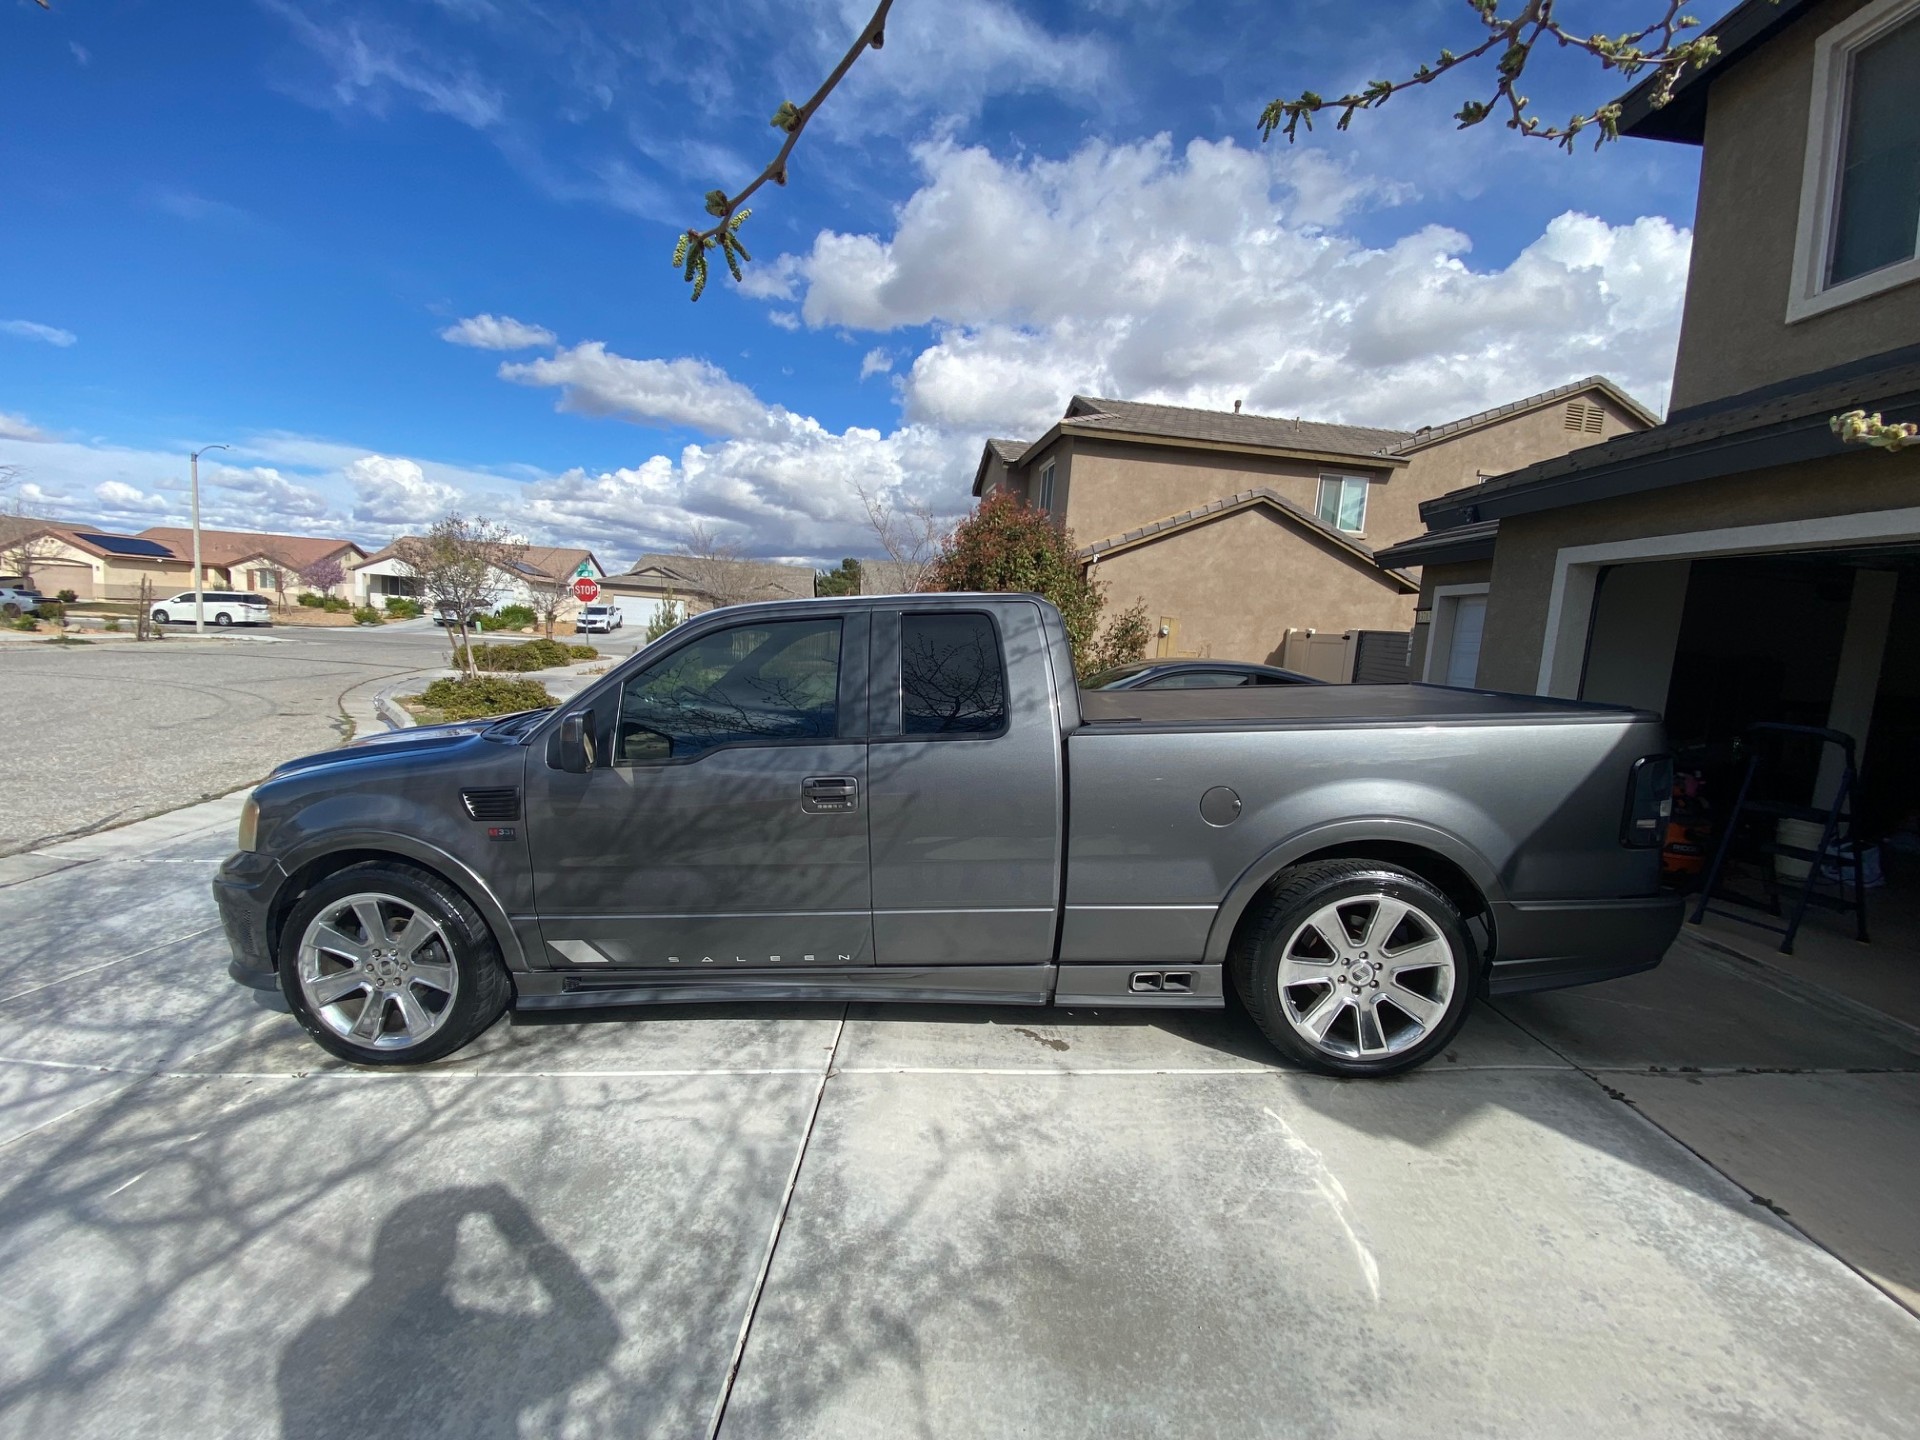 Rare Find! 2007 S331 Sports Truck with Whipple Supercharger – Original Owner (No. 35)